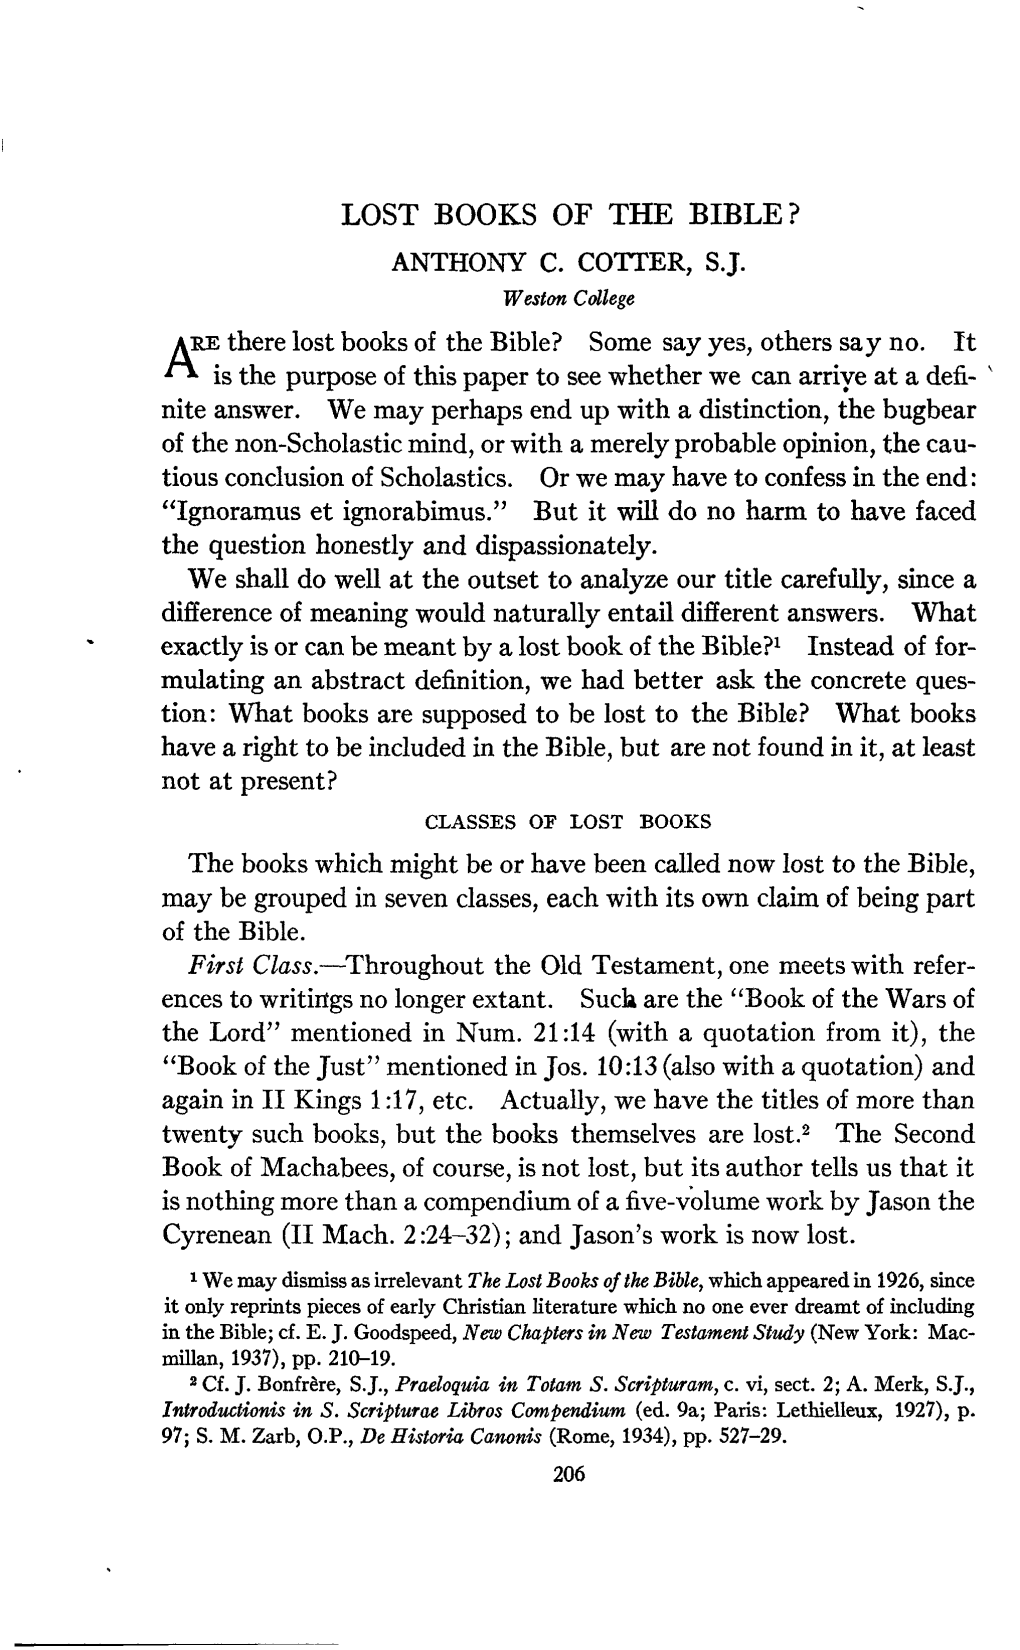 ARE There Lost Books of the Bible? Some Say Yes, Others Say No. It ** Is the Purpose of This Paper to See Whether We Can Arrive at a Defi- V Nite Answer